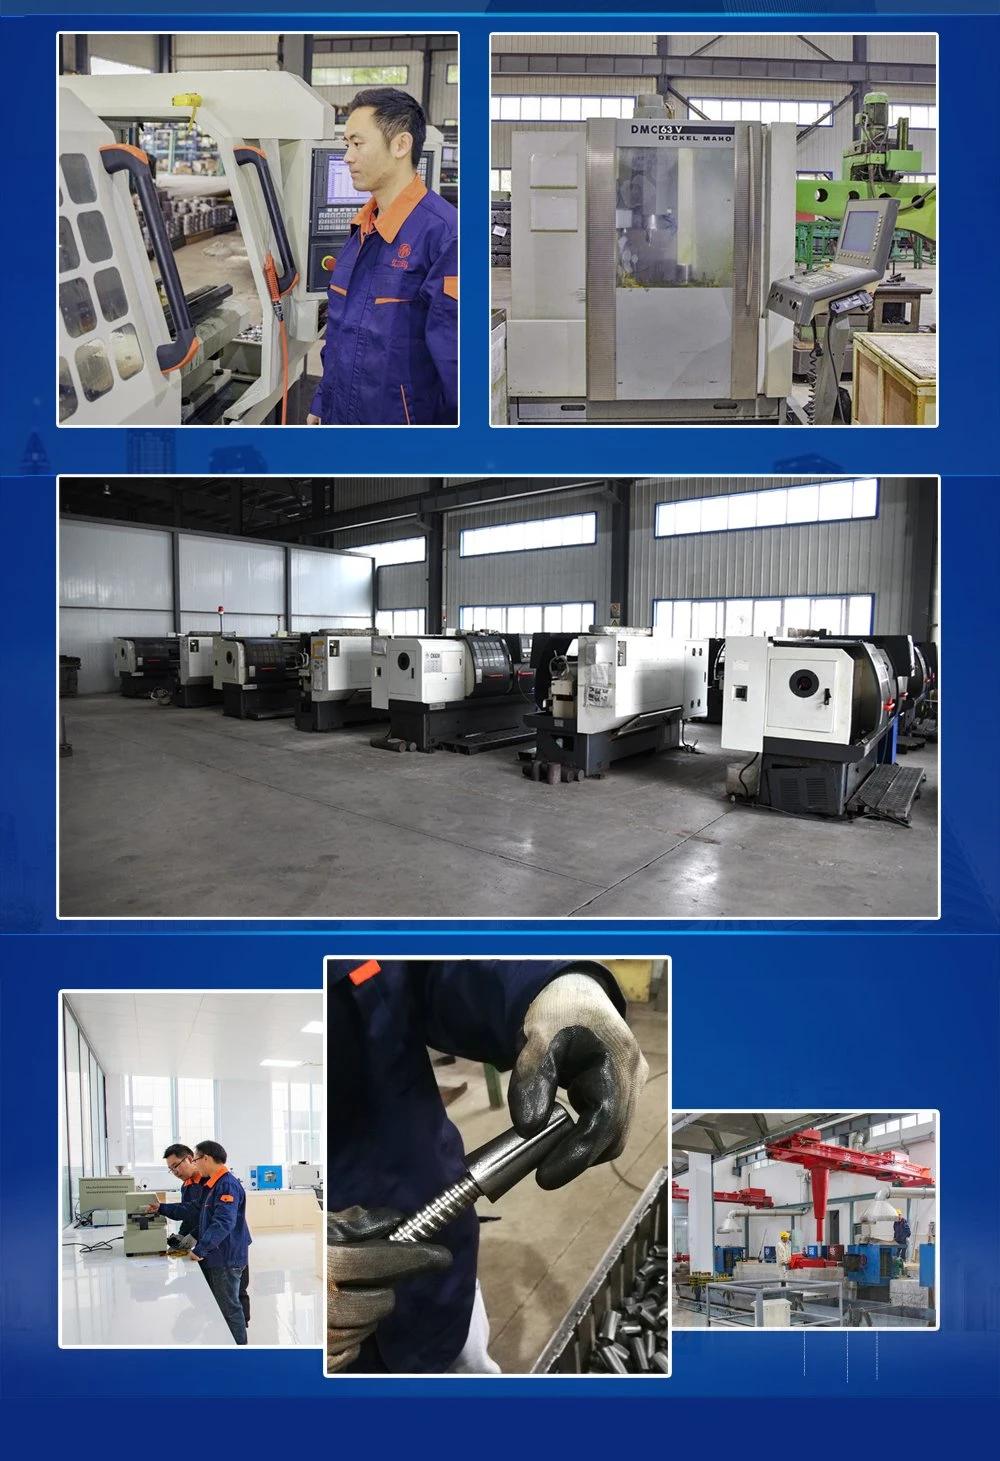 Casting,Forging,Pressing,Mining,Auto Part,Nuts,Pre-Tensioning,Mating Facility,Bus,Railway,Underground,Truck,Power Fitting,Hot Galvanzied,Accessories,Component